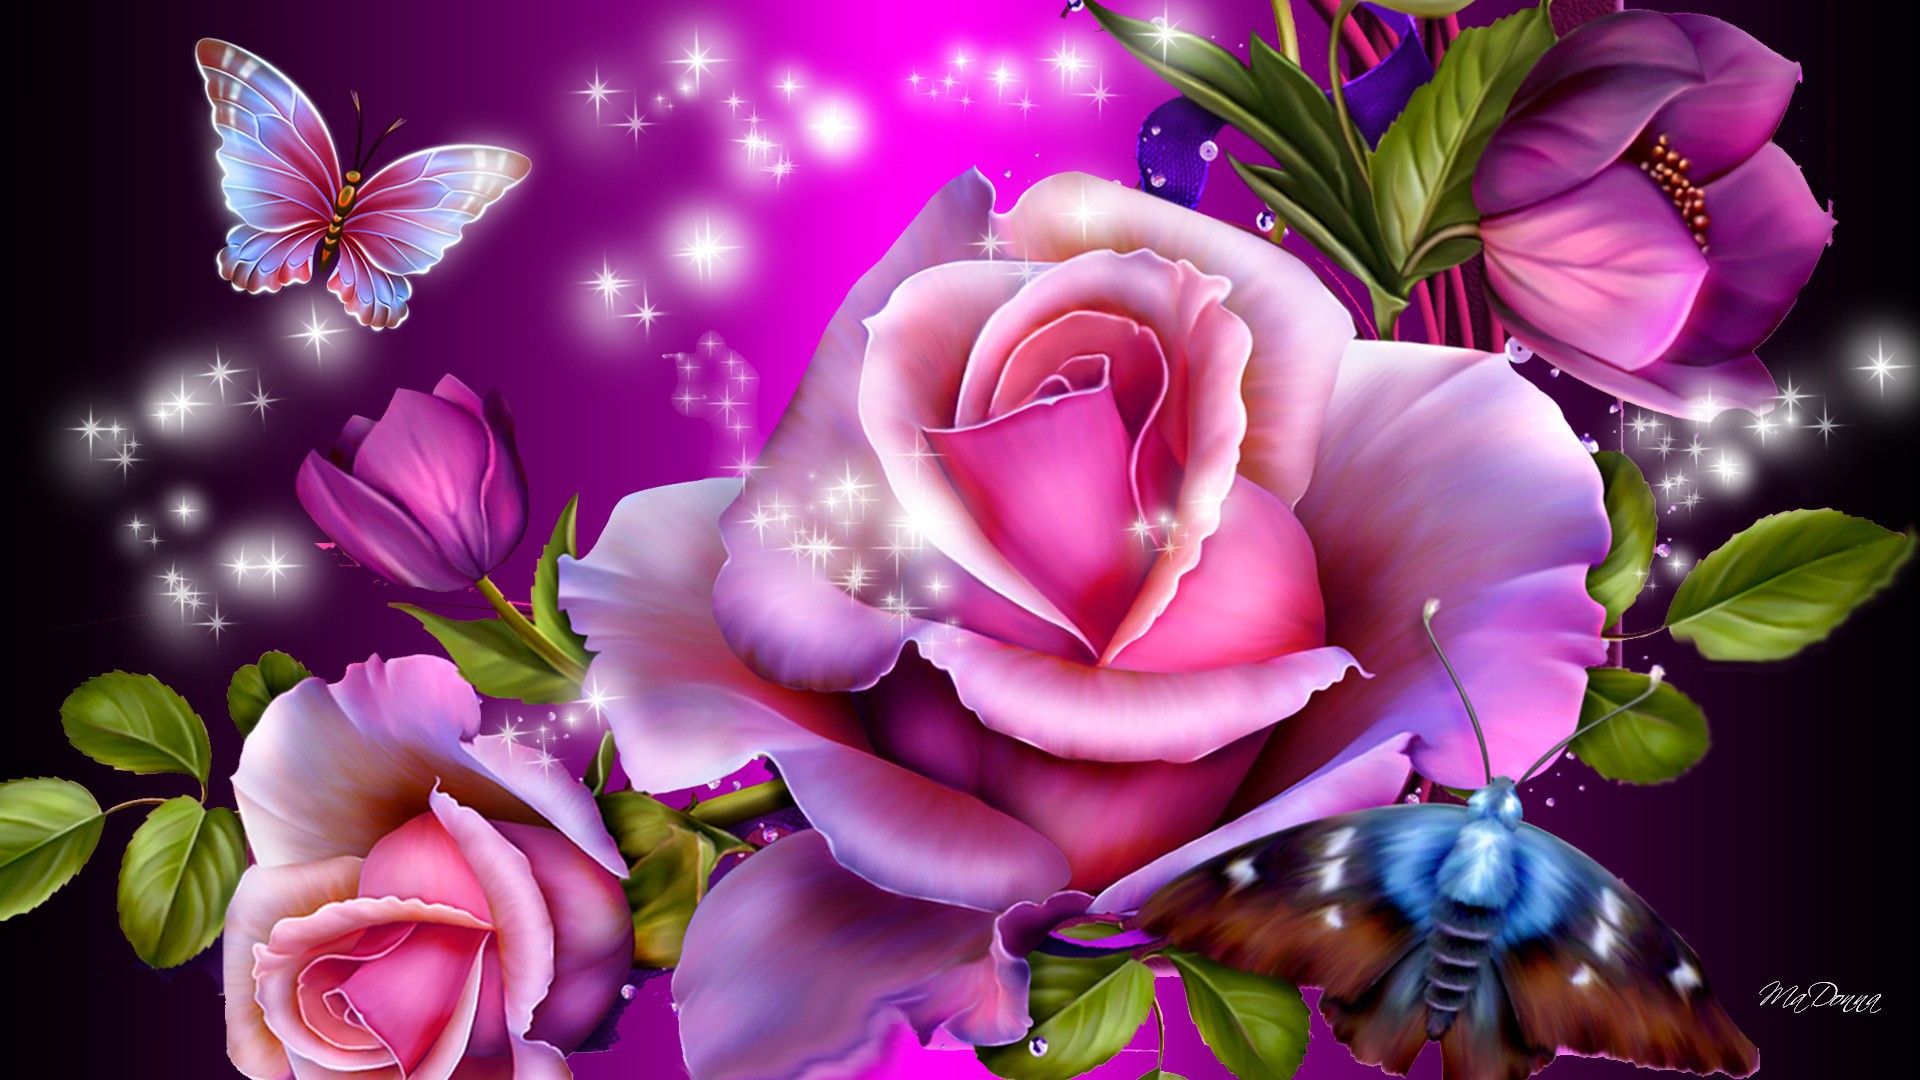 Roses And Butterflies HD Wallpaper Rose S Aren T Always Thorny